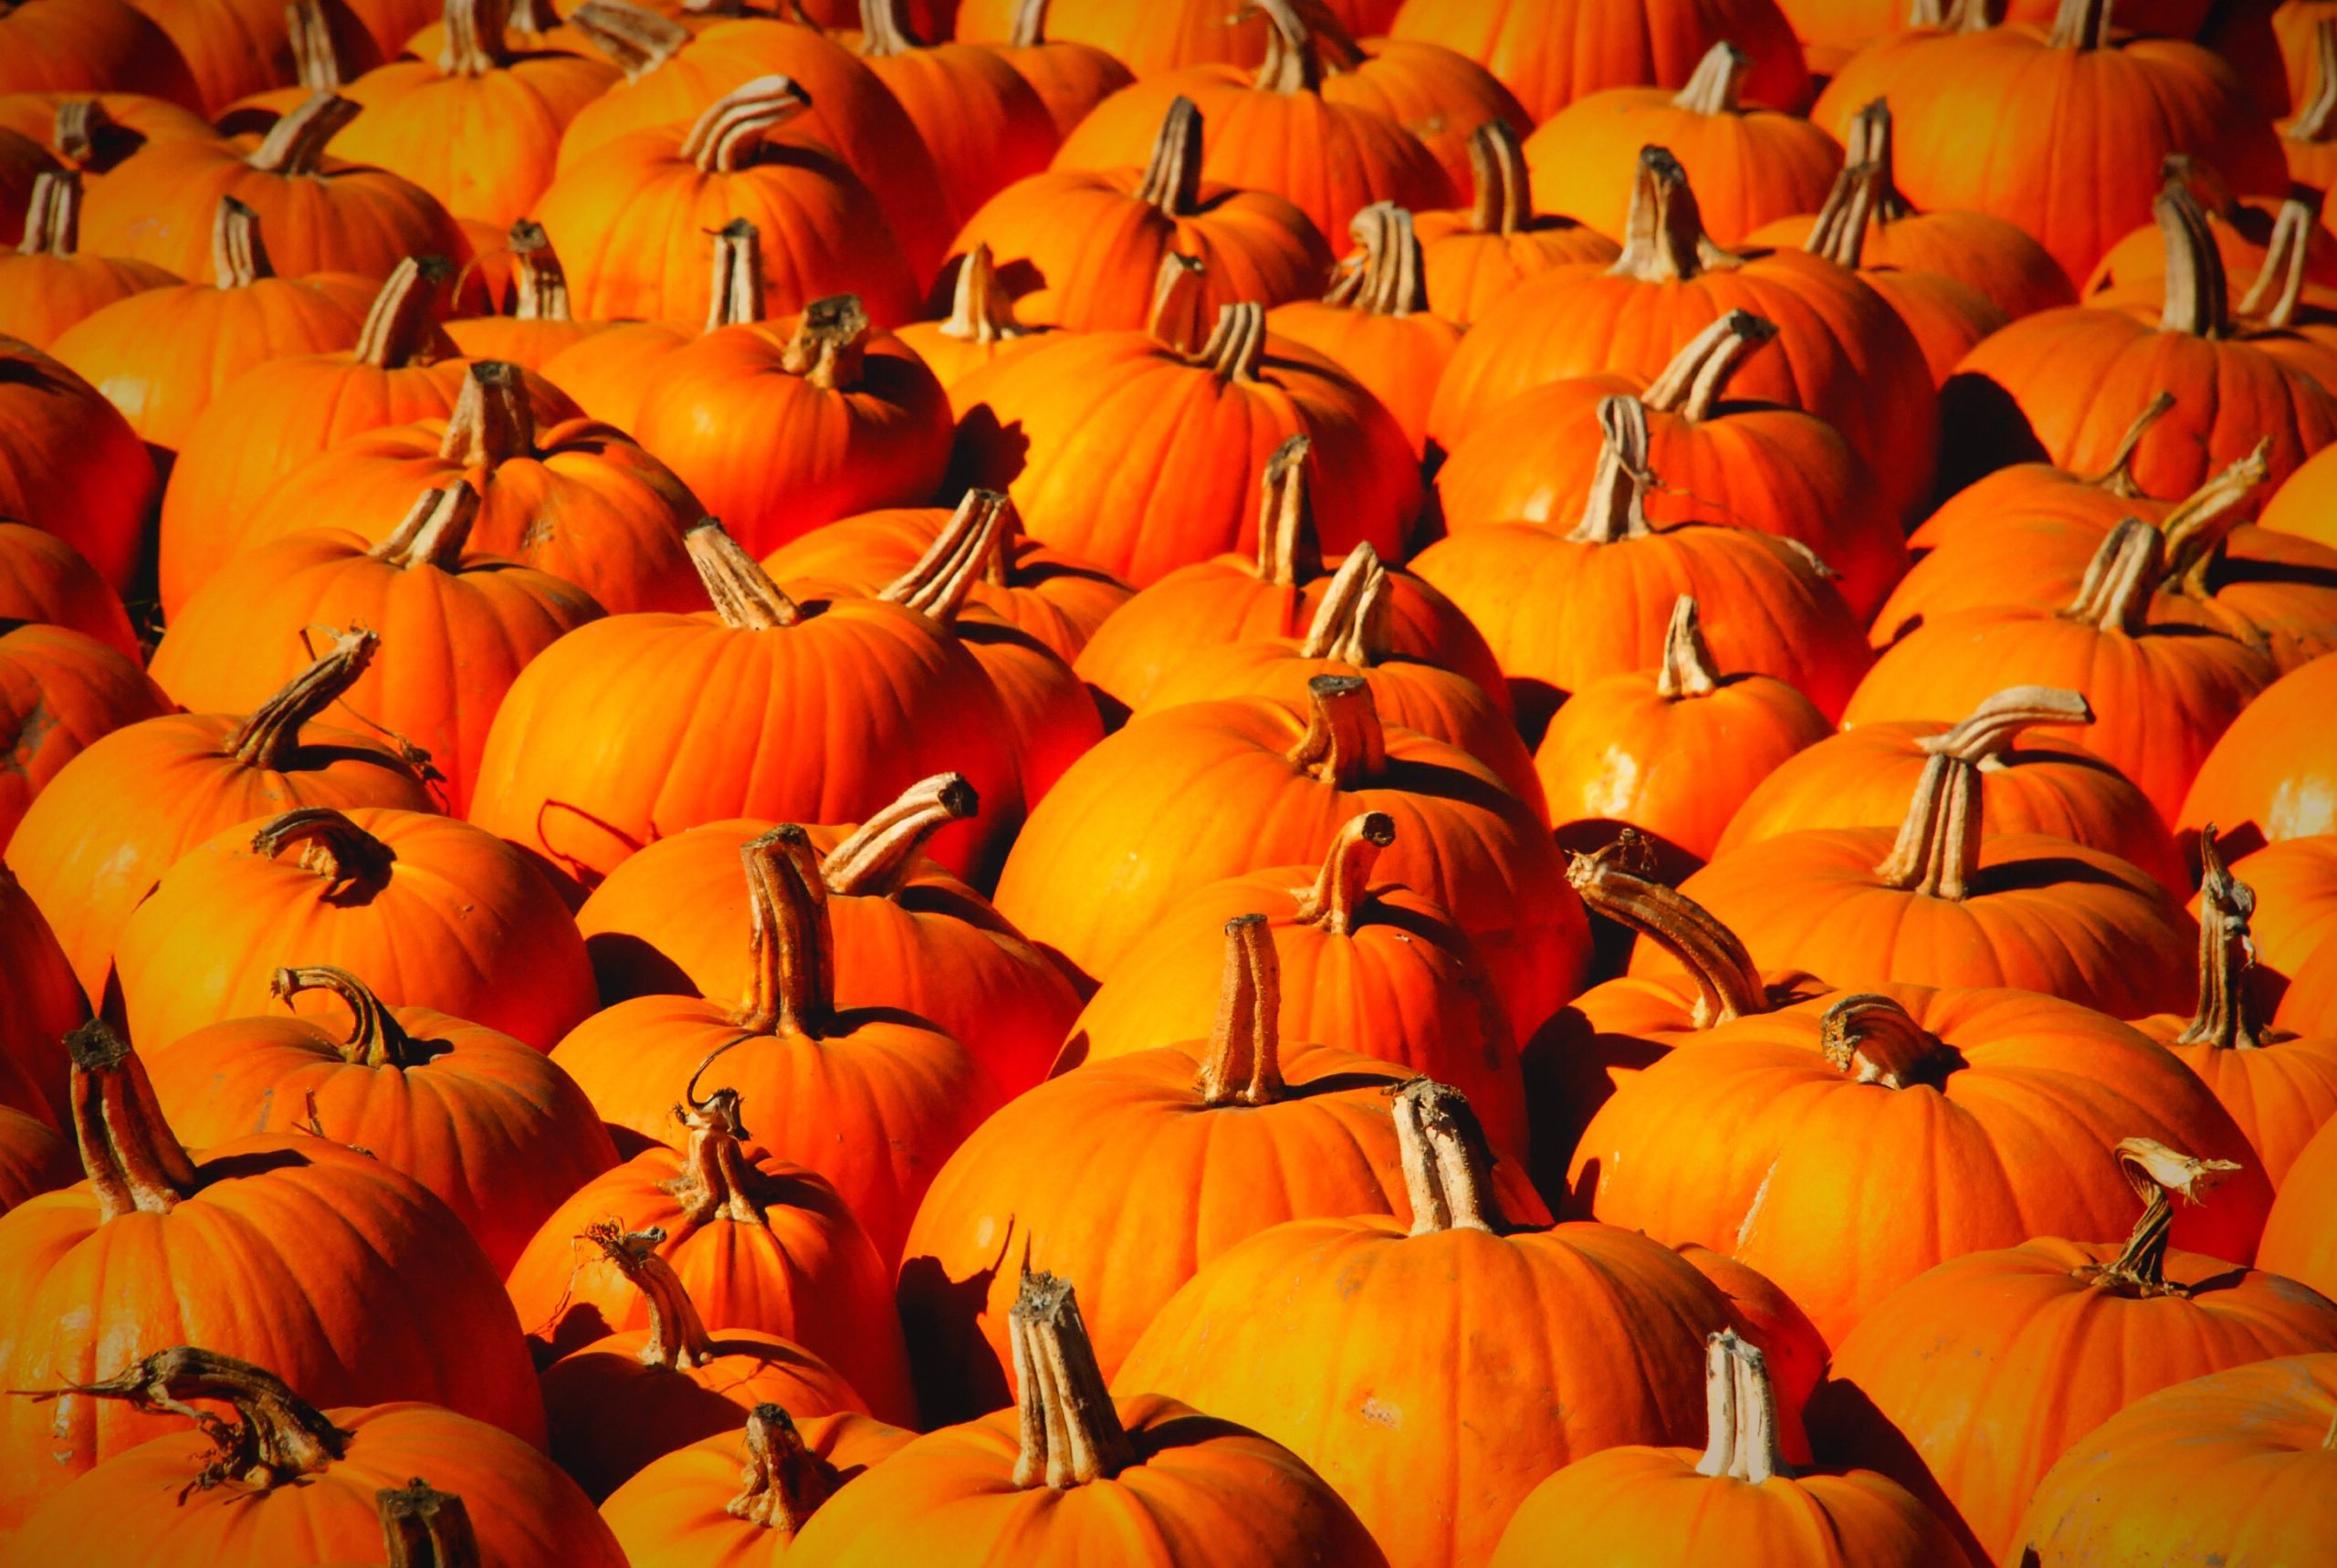 Enjoy Family Fun at the Pumpkin Patch, Followed by a Delicious Meal at McGrath’s